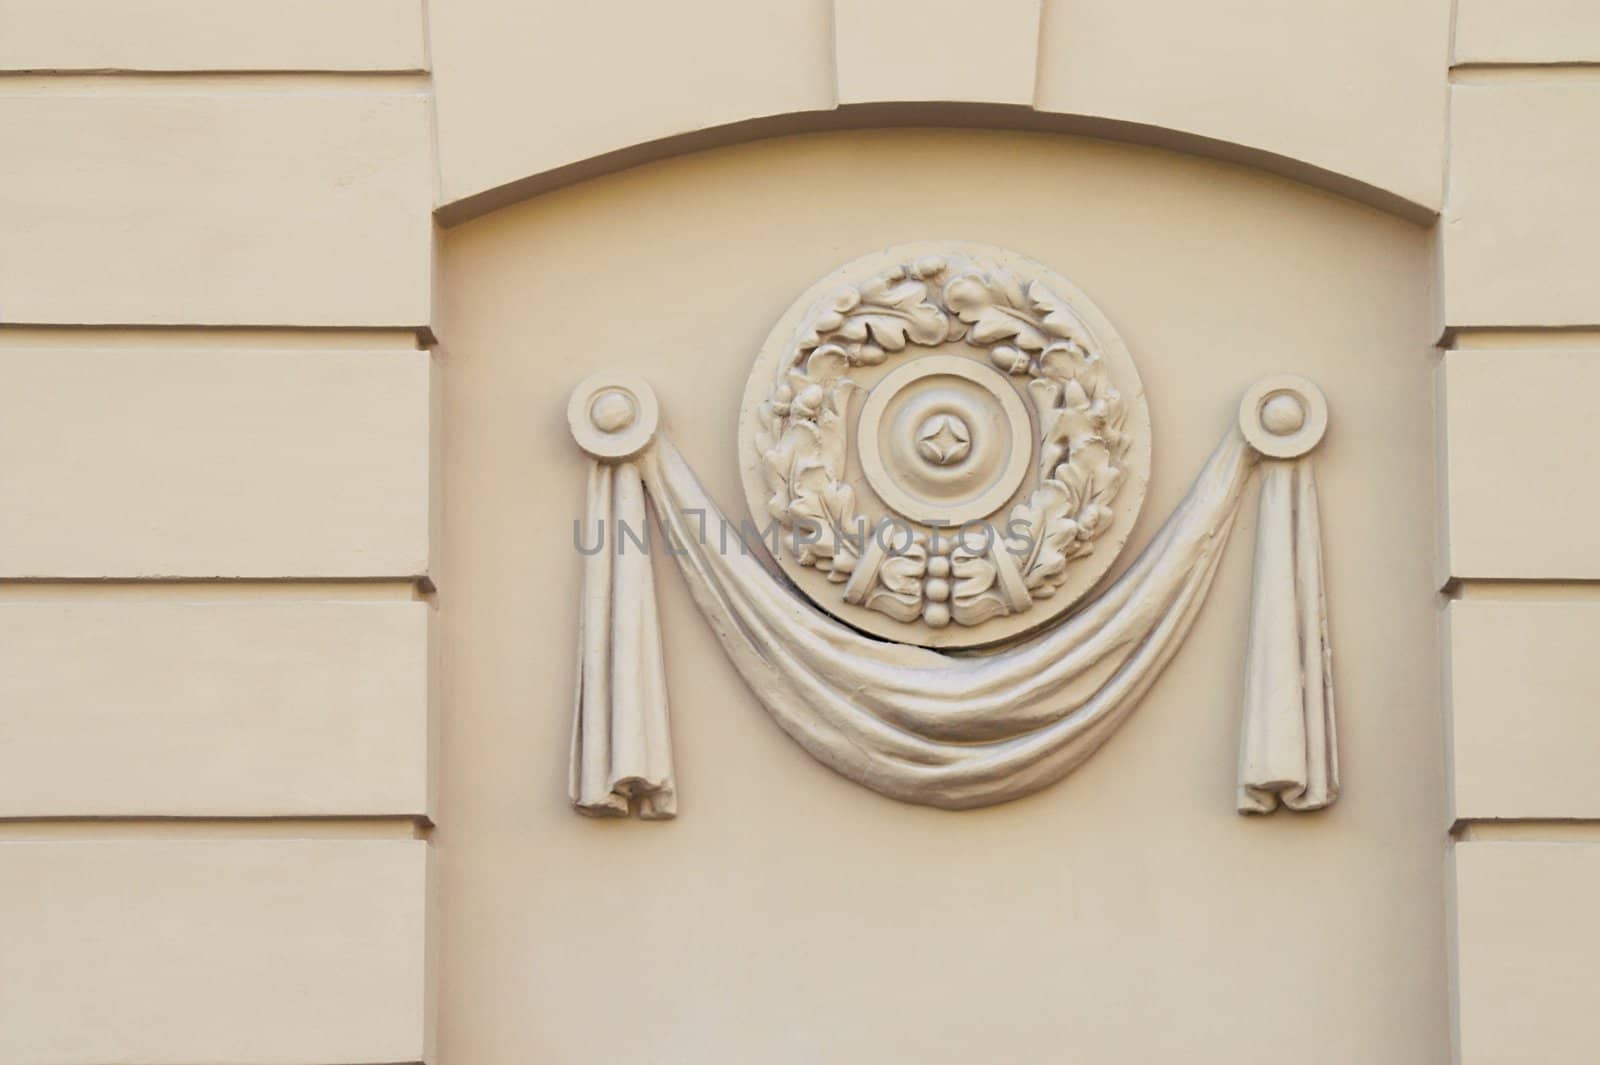 A close-up detail of a building facade decor. A moulded plastic panel. Early soviet-epoch style.